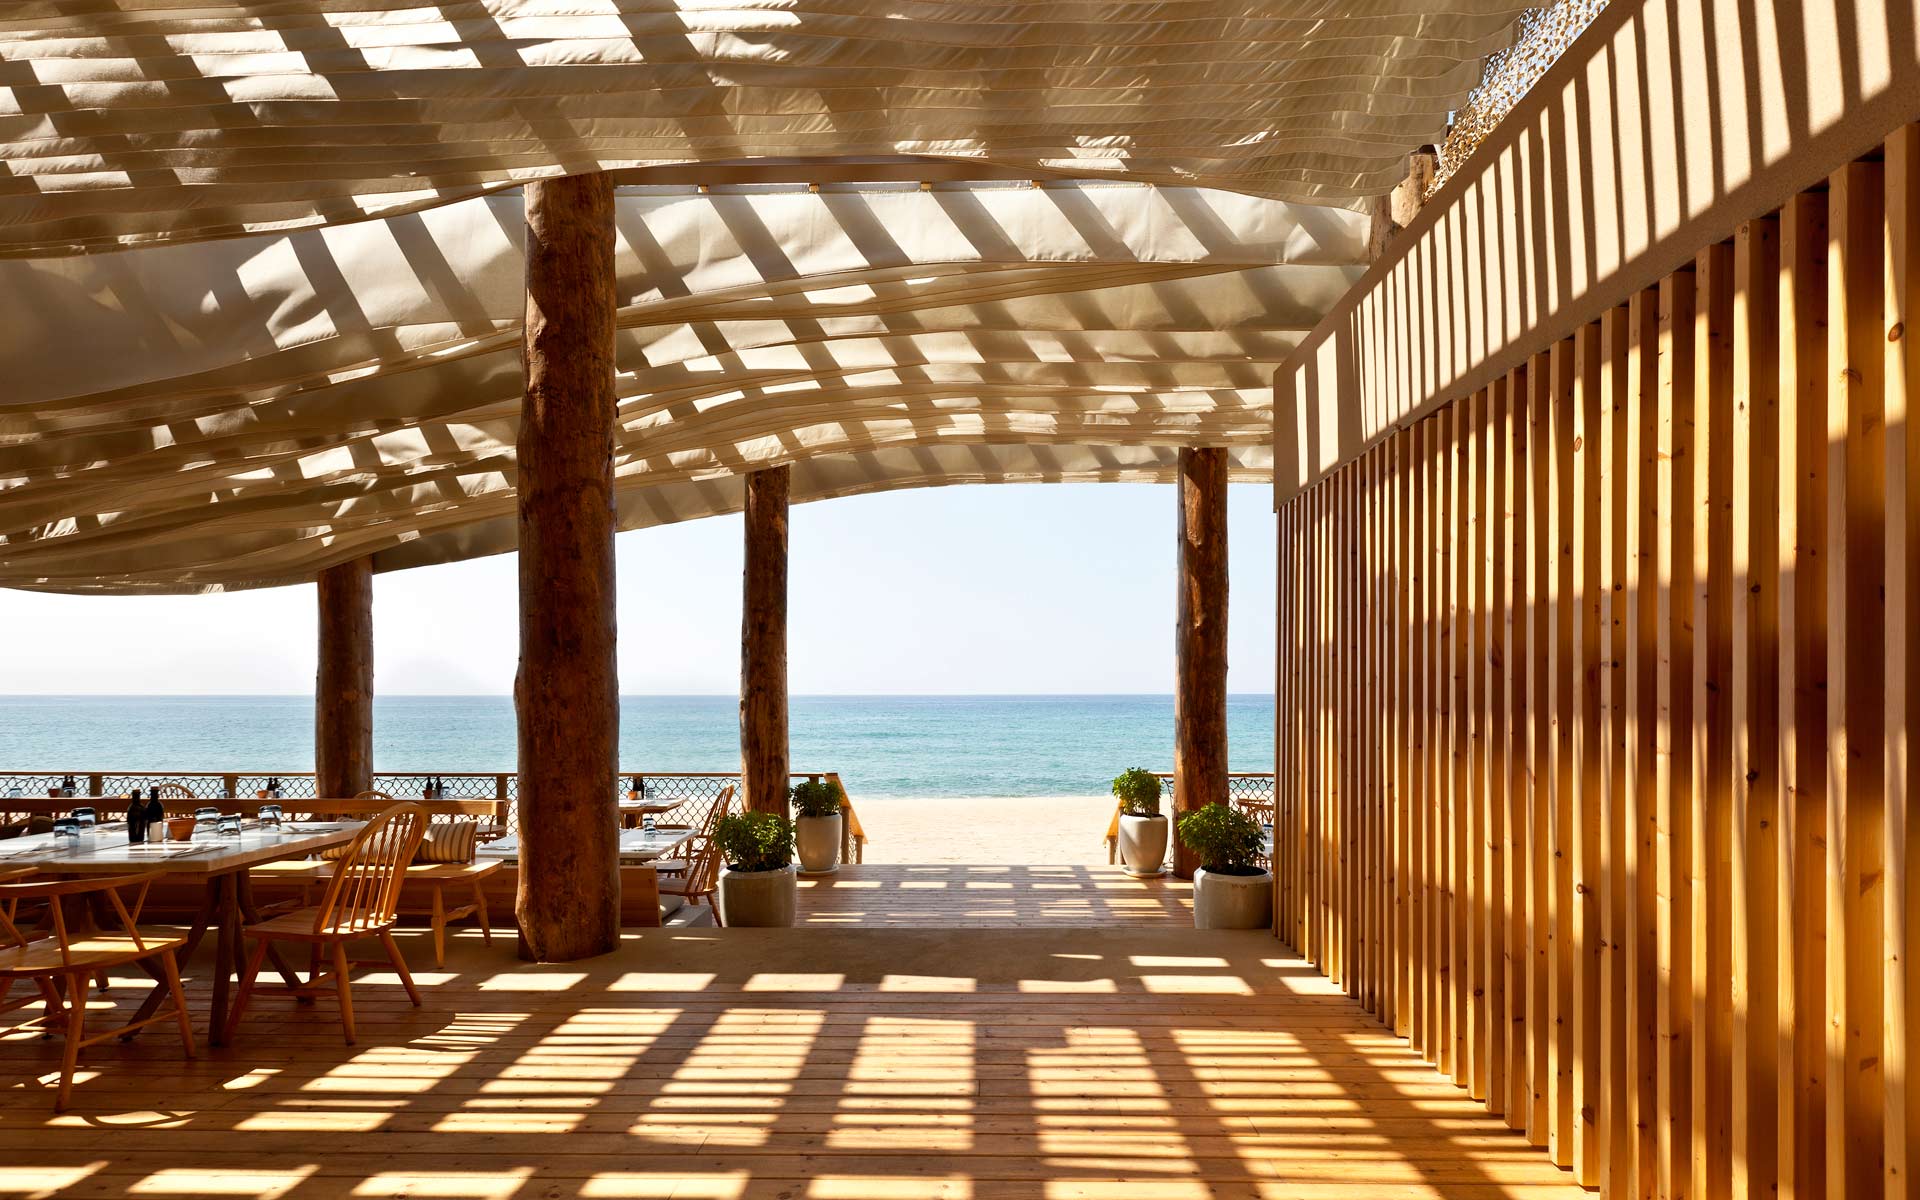 Restaurant with sea view in wood